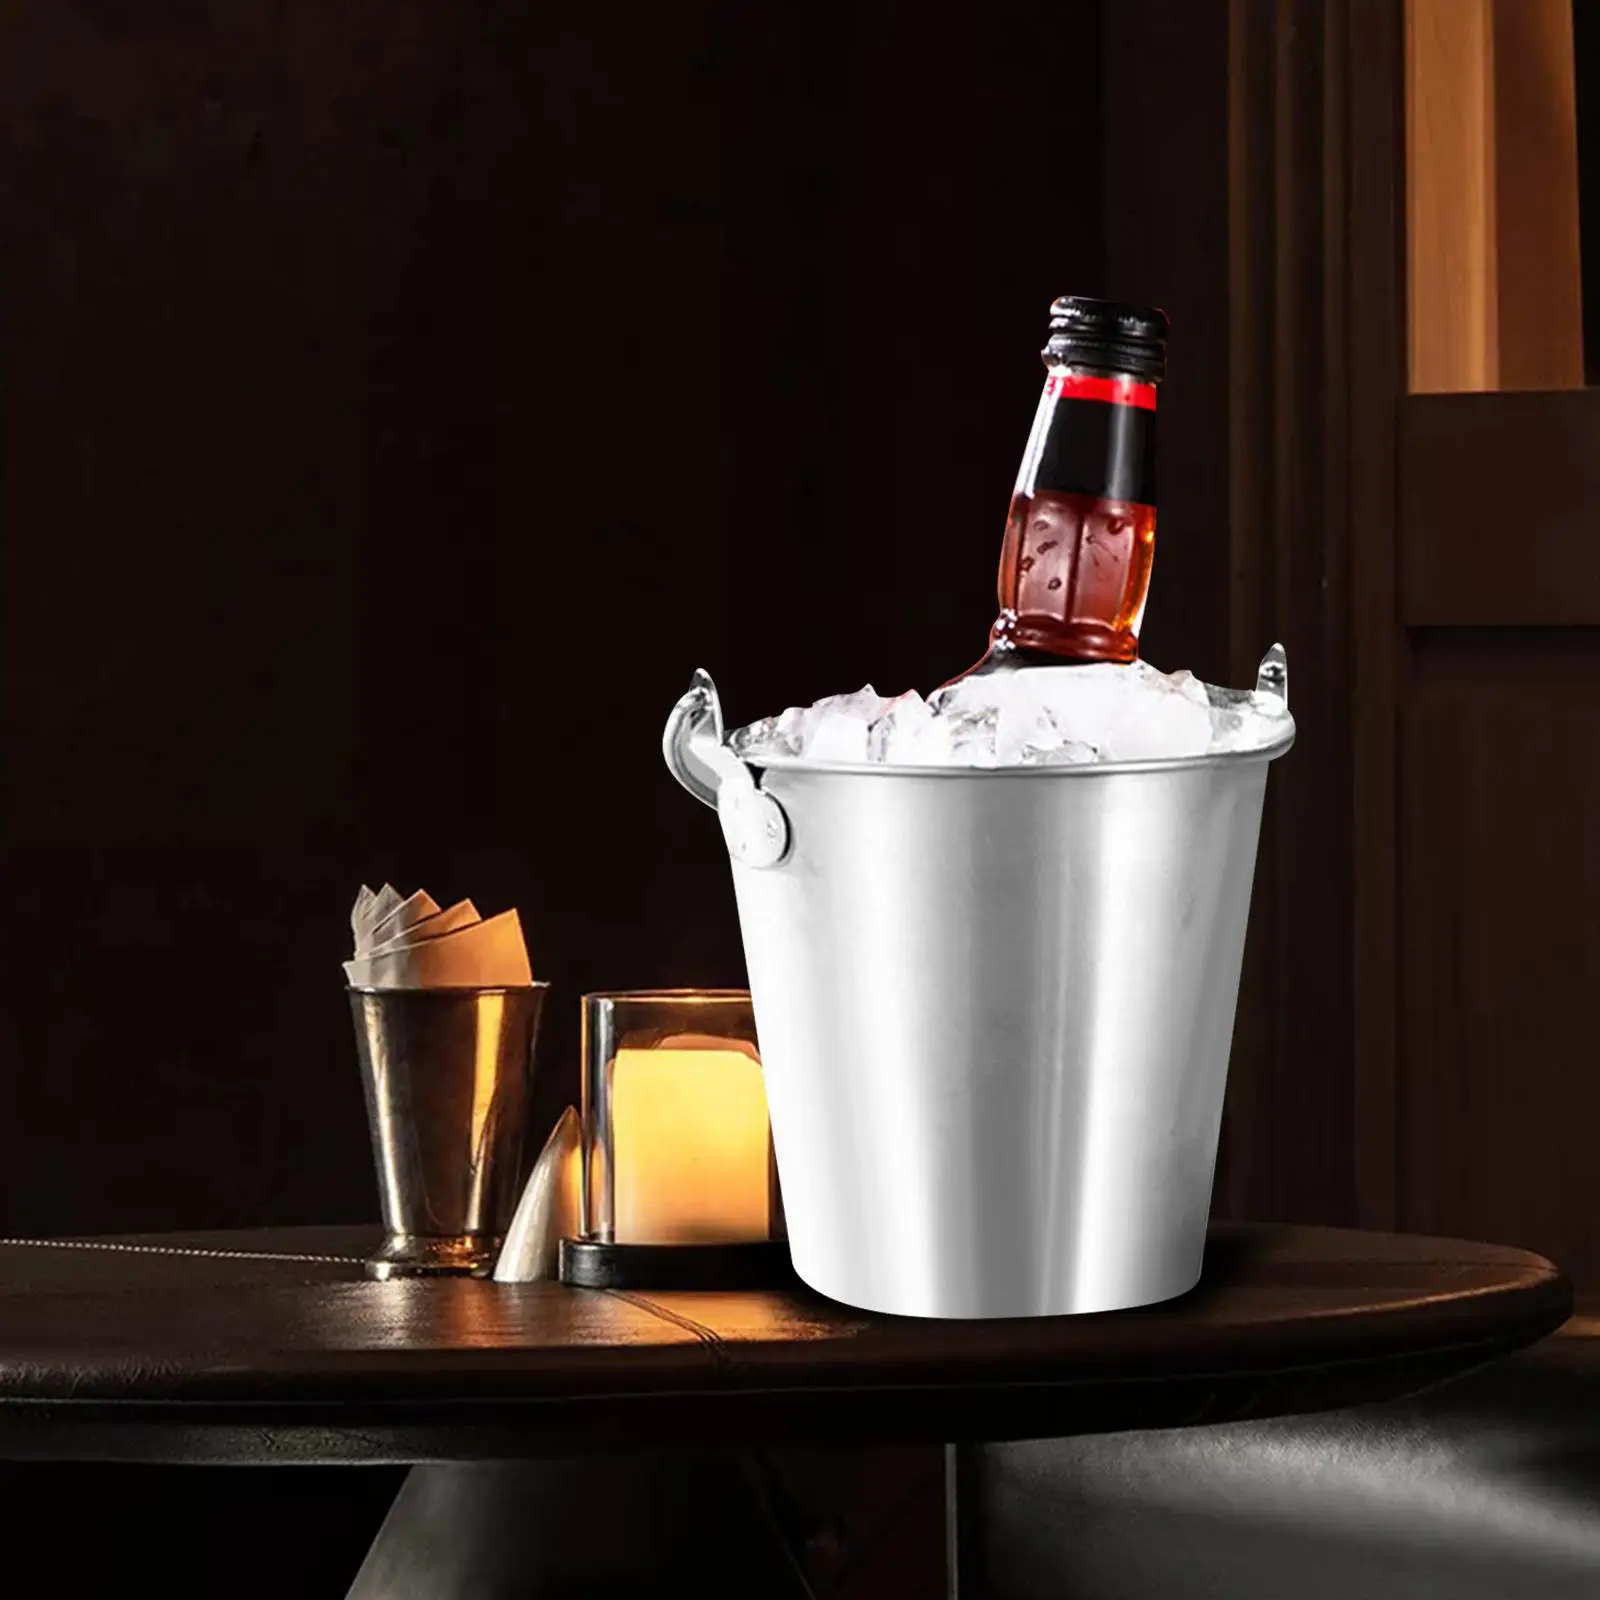 Ice Bucket for Party Bar Hotel Home Stainless Steel with Carry Handle Accessory Dining Room Portable Snacks Storage Bucket 1.7L